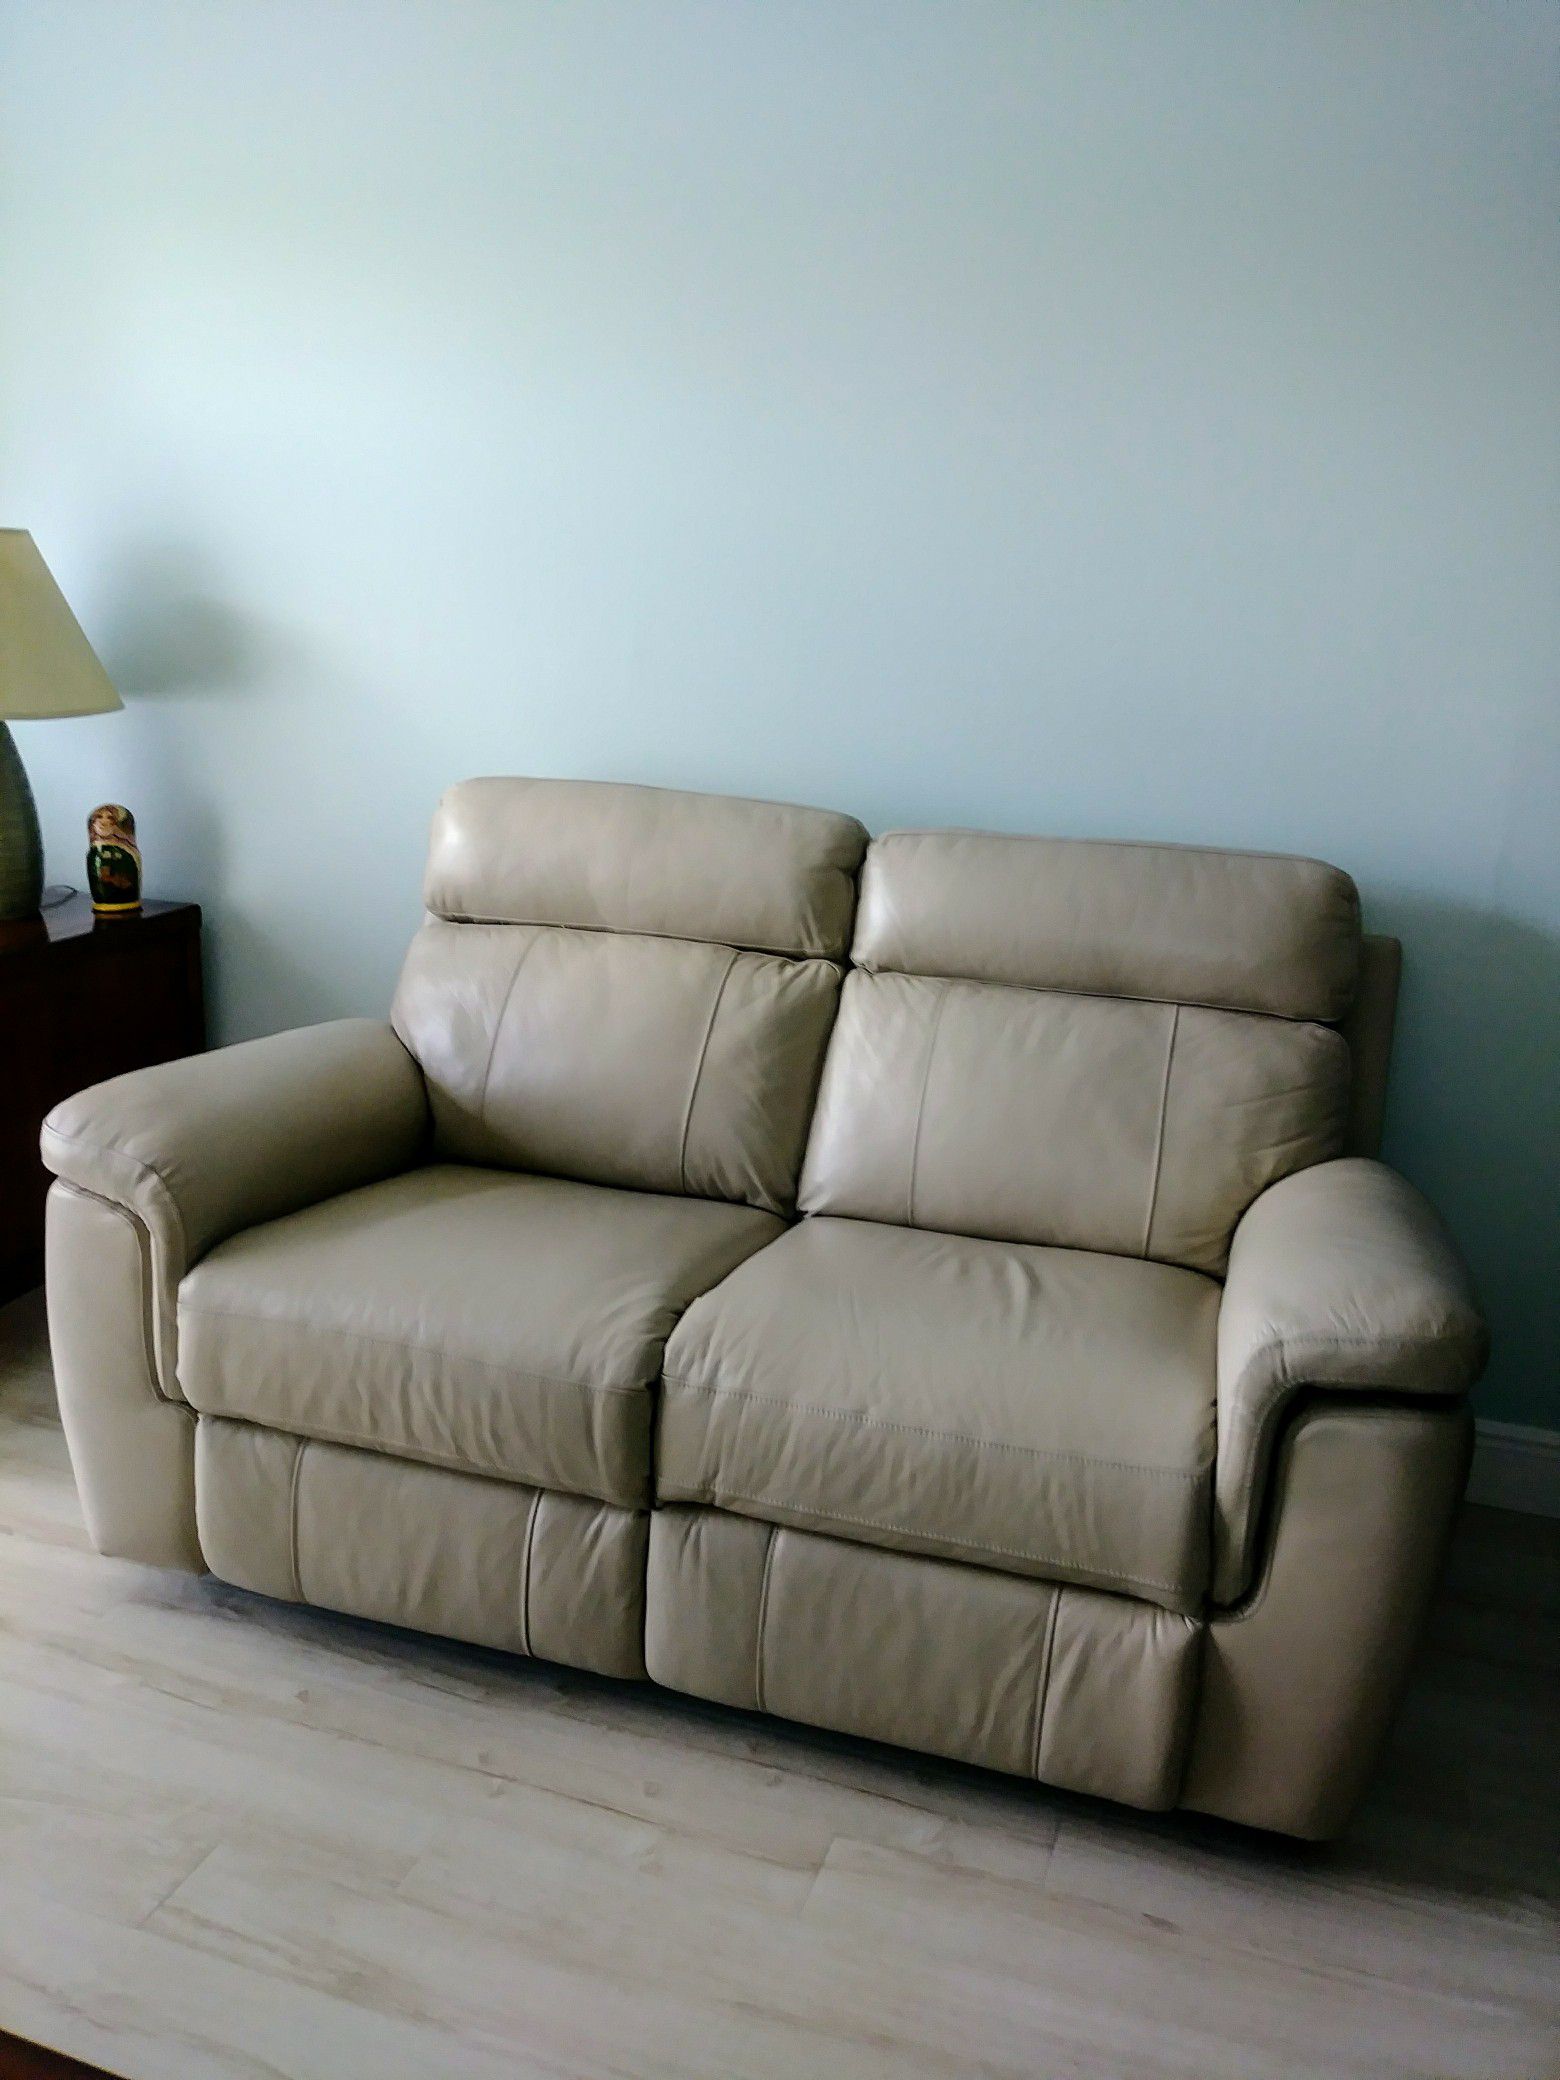 Moving Sale! Gently used, leather loveseat, double recliner. It measures 65" L x 36" D. One seat has electric power one manual power.